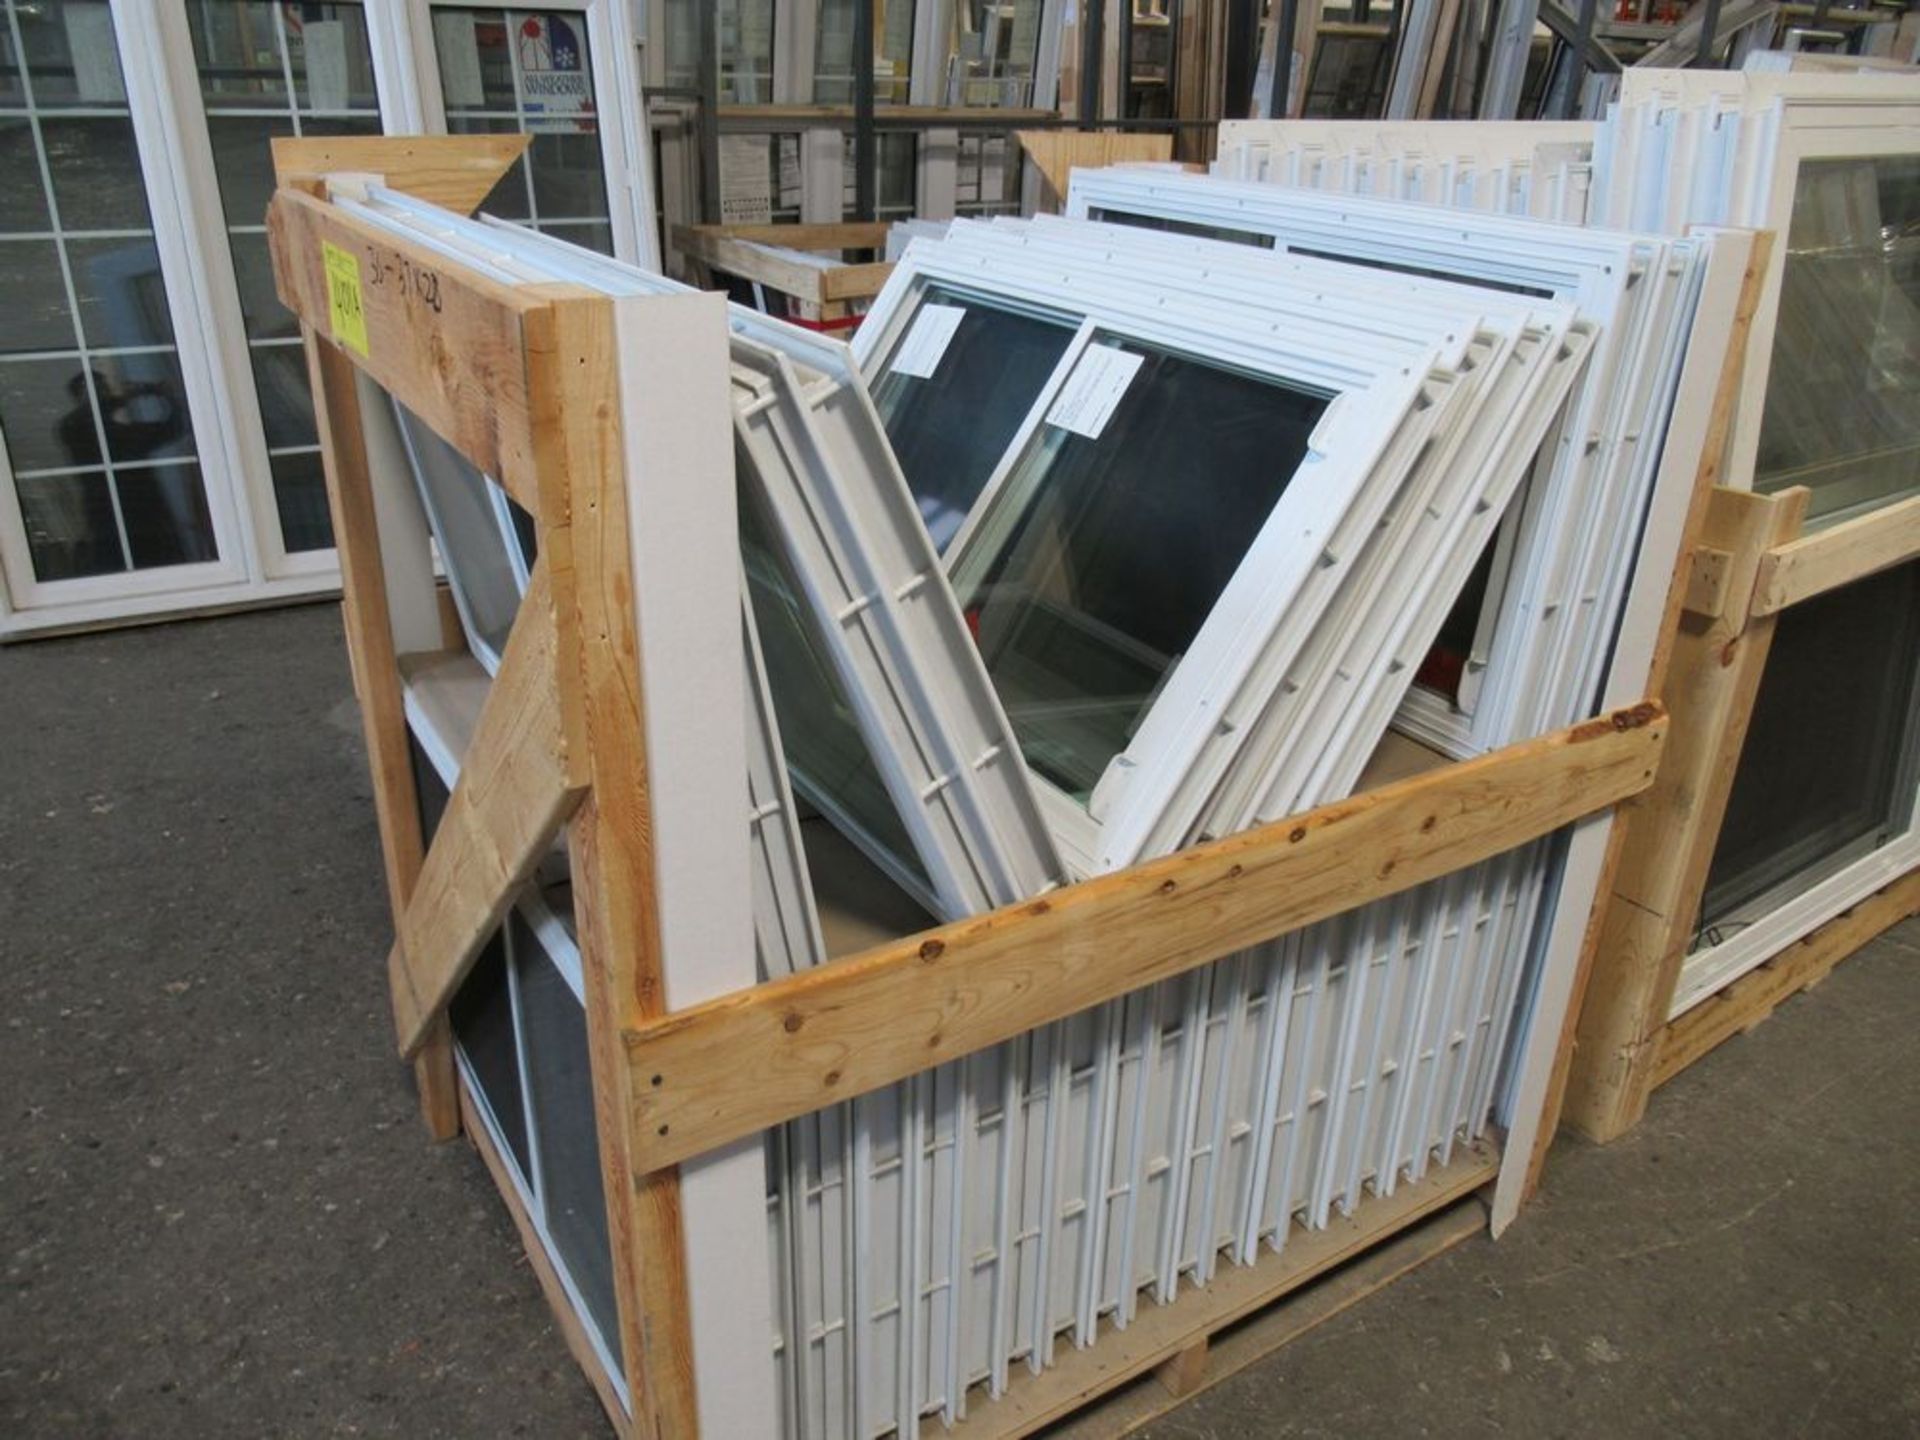 41 PC. ASST. 30-37" X 22" APPROX. 11-65" X 21" APPROX. WHITE DOOR INSERTS, 2 CRATES